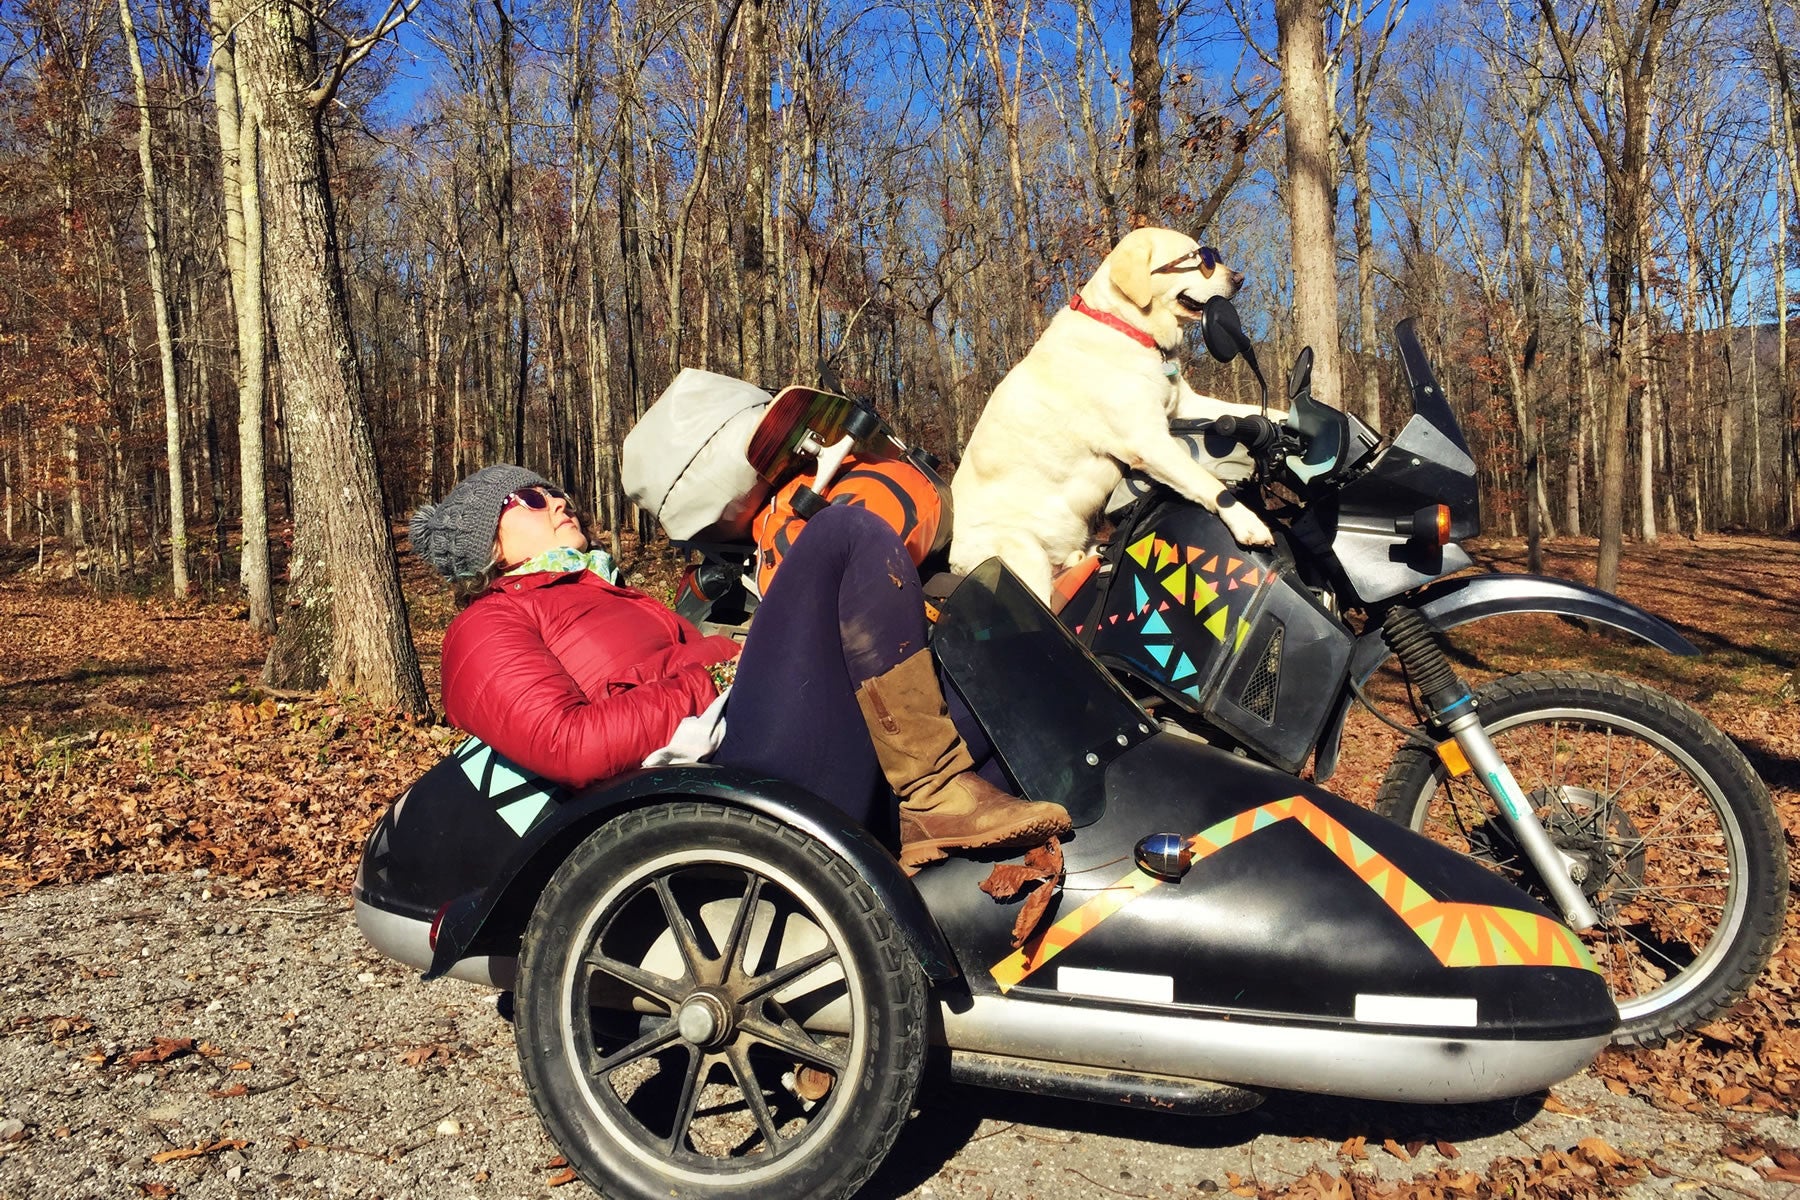 Baylor sits in the drivers seat of the motorcycle with sunglasses on while Mallory sits in the sidecar.